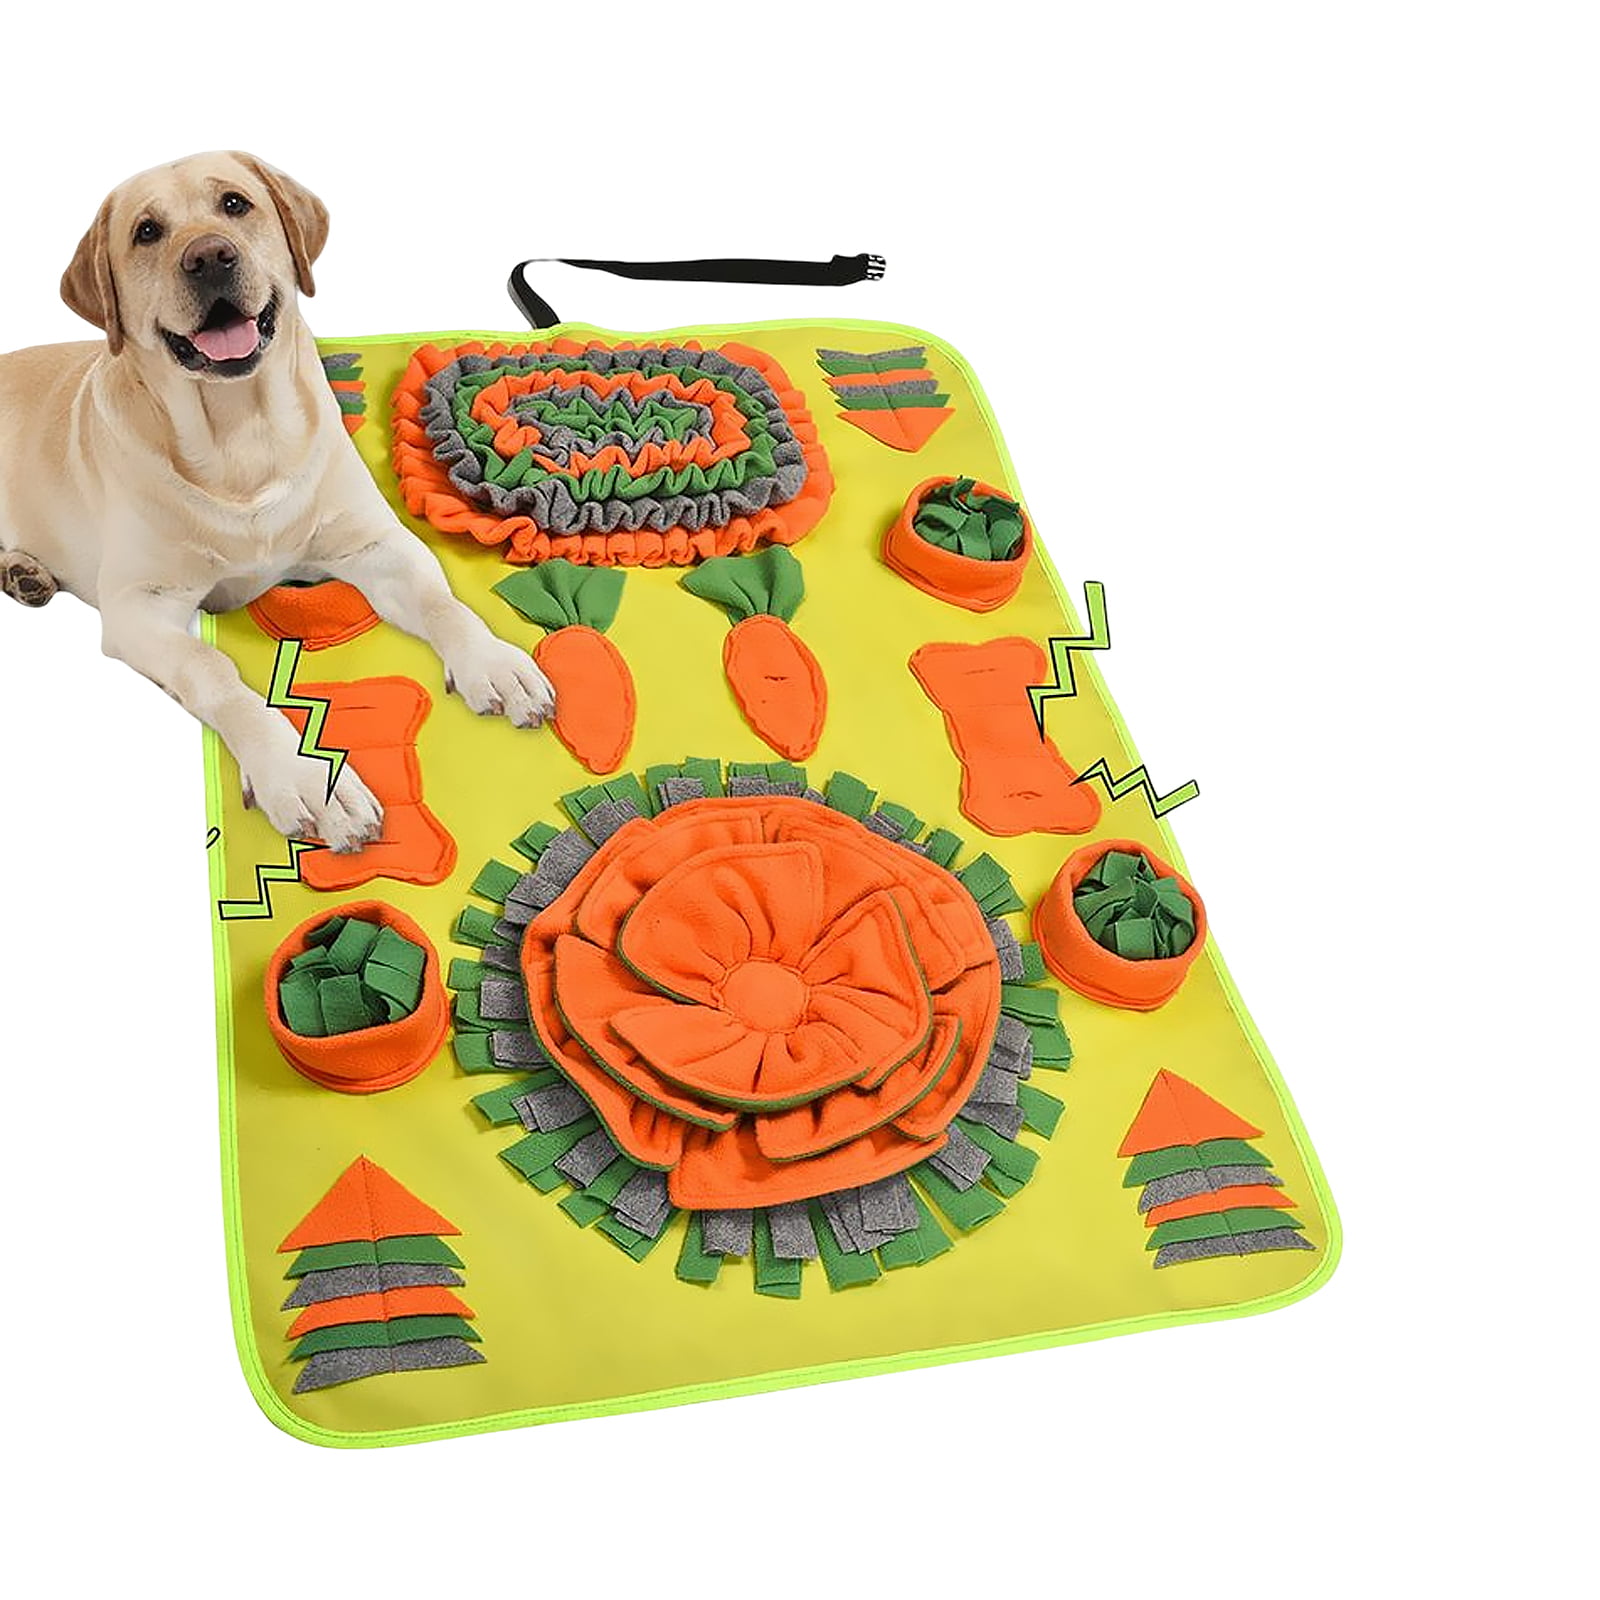 Dogs Sniff Toys Sniff Pads Pet Training Stress Relief Blankets Slow Food  Puzzle Games Pad Dog Toys - China Dog Bowl and Sniffing Mat price